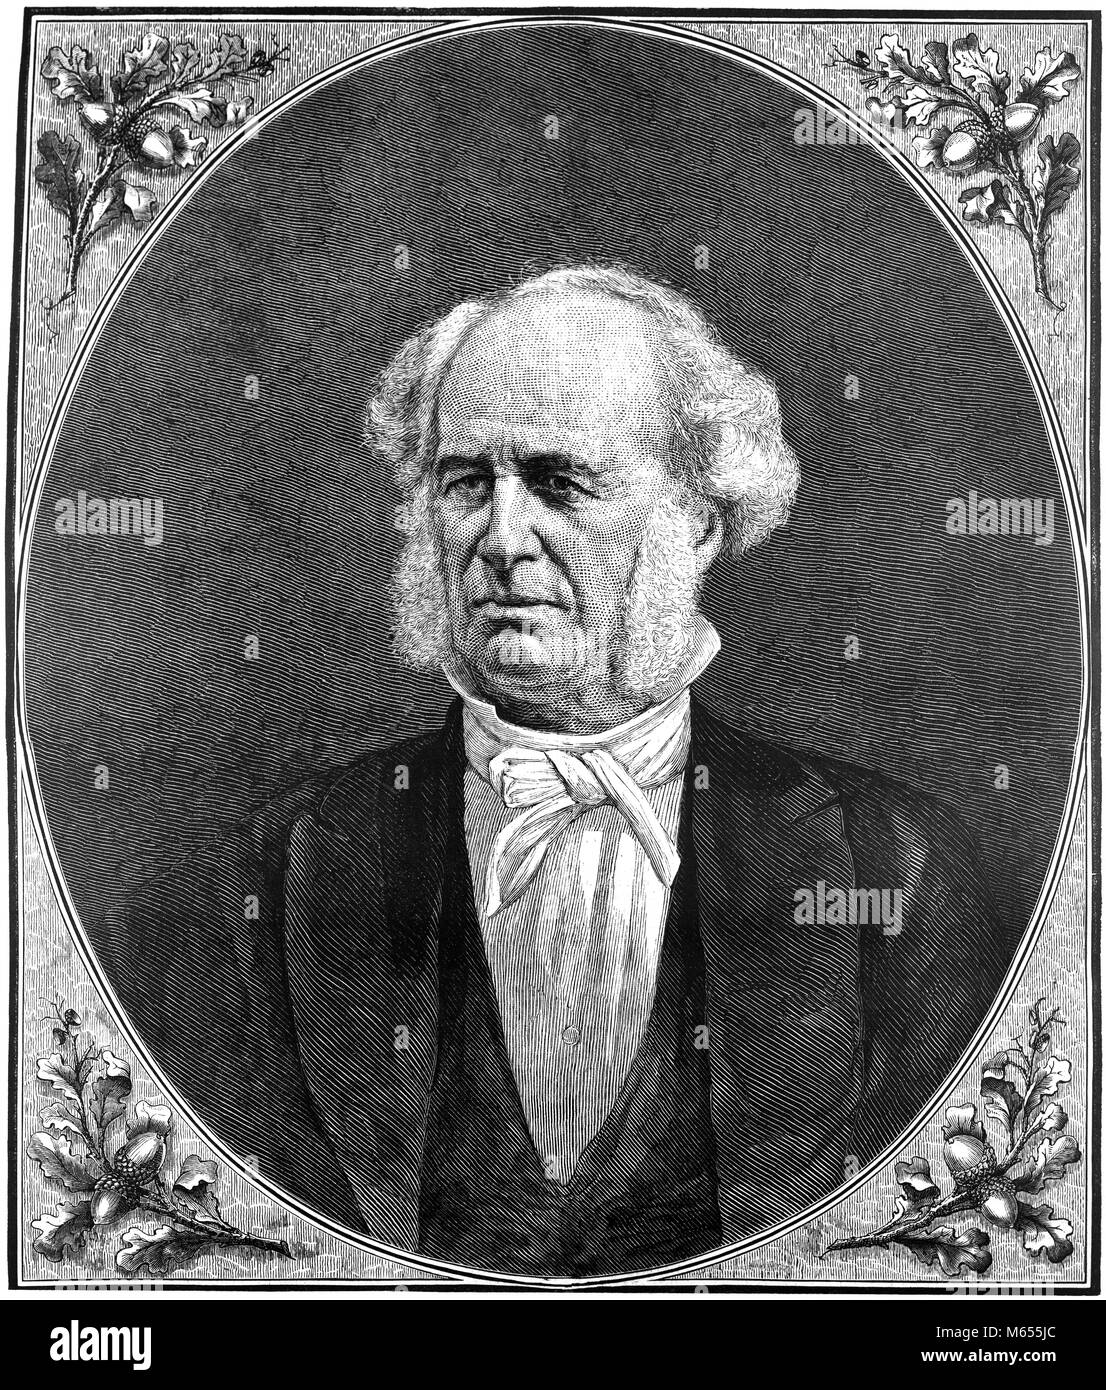 1800s 1860s 1870s PORTRAIT CORNELIUS VANDERBILT AMERICAN ENTREPRENEUR - asp fwp697 ASP001 HARS WEALTH OPPORTUNITY AUTHORITY FACIAL HAIR 1860s 1870s ENTREPRENEUR RAILROADS COMMODORE MALES SHIPPING SIDEBURNS B&W BILLIONAIRE BLACK AND WHITE CAUCASIAN ETHNICITY COMMODORE VANDERBILT CORNELIUS CORNELIUS VANDERBILT DYNASTY EMPIRE BUILDER MAGNATE NEW YORK CENTRAL NEW YORKER OLD FASHIONED PATRIARCH PERSONS PHILANTHROPIST VANDERBILT VANDERBILT UNIVERSITY Stock Photo